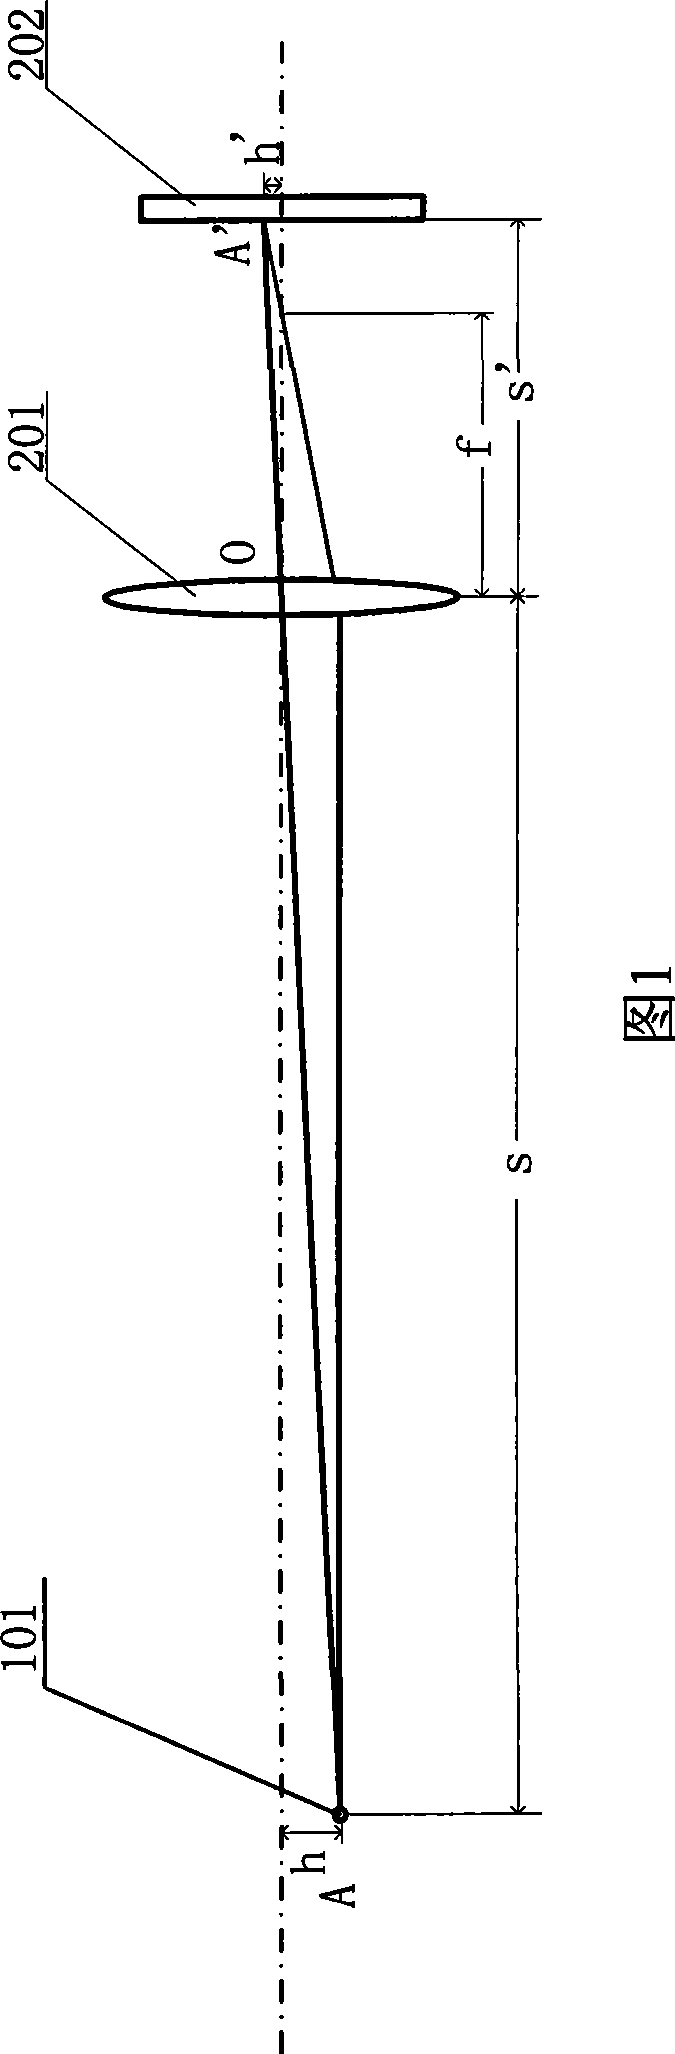 Apparatus and method for remotely measuring subgrade settlement by laser